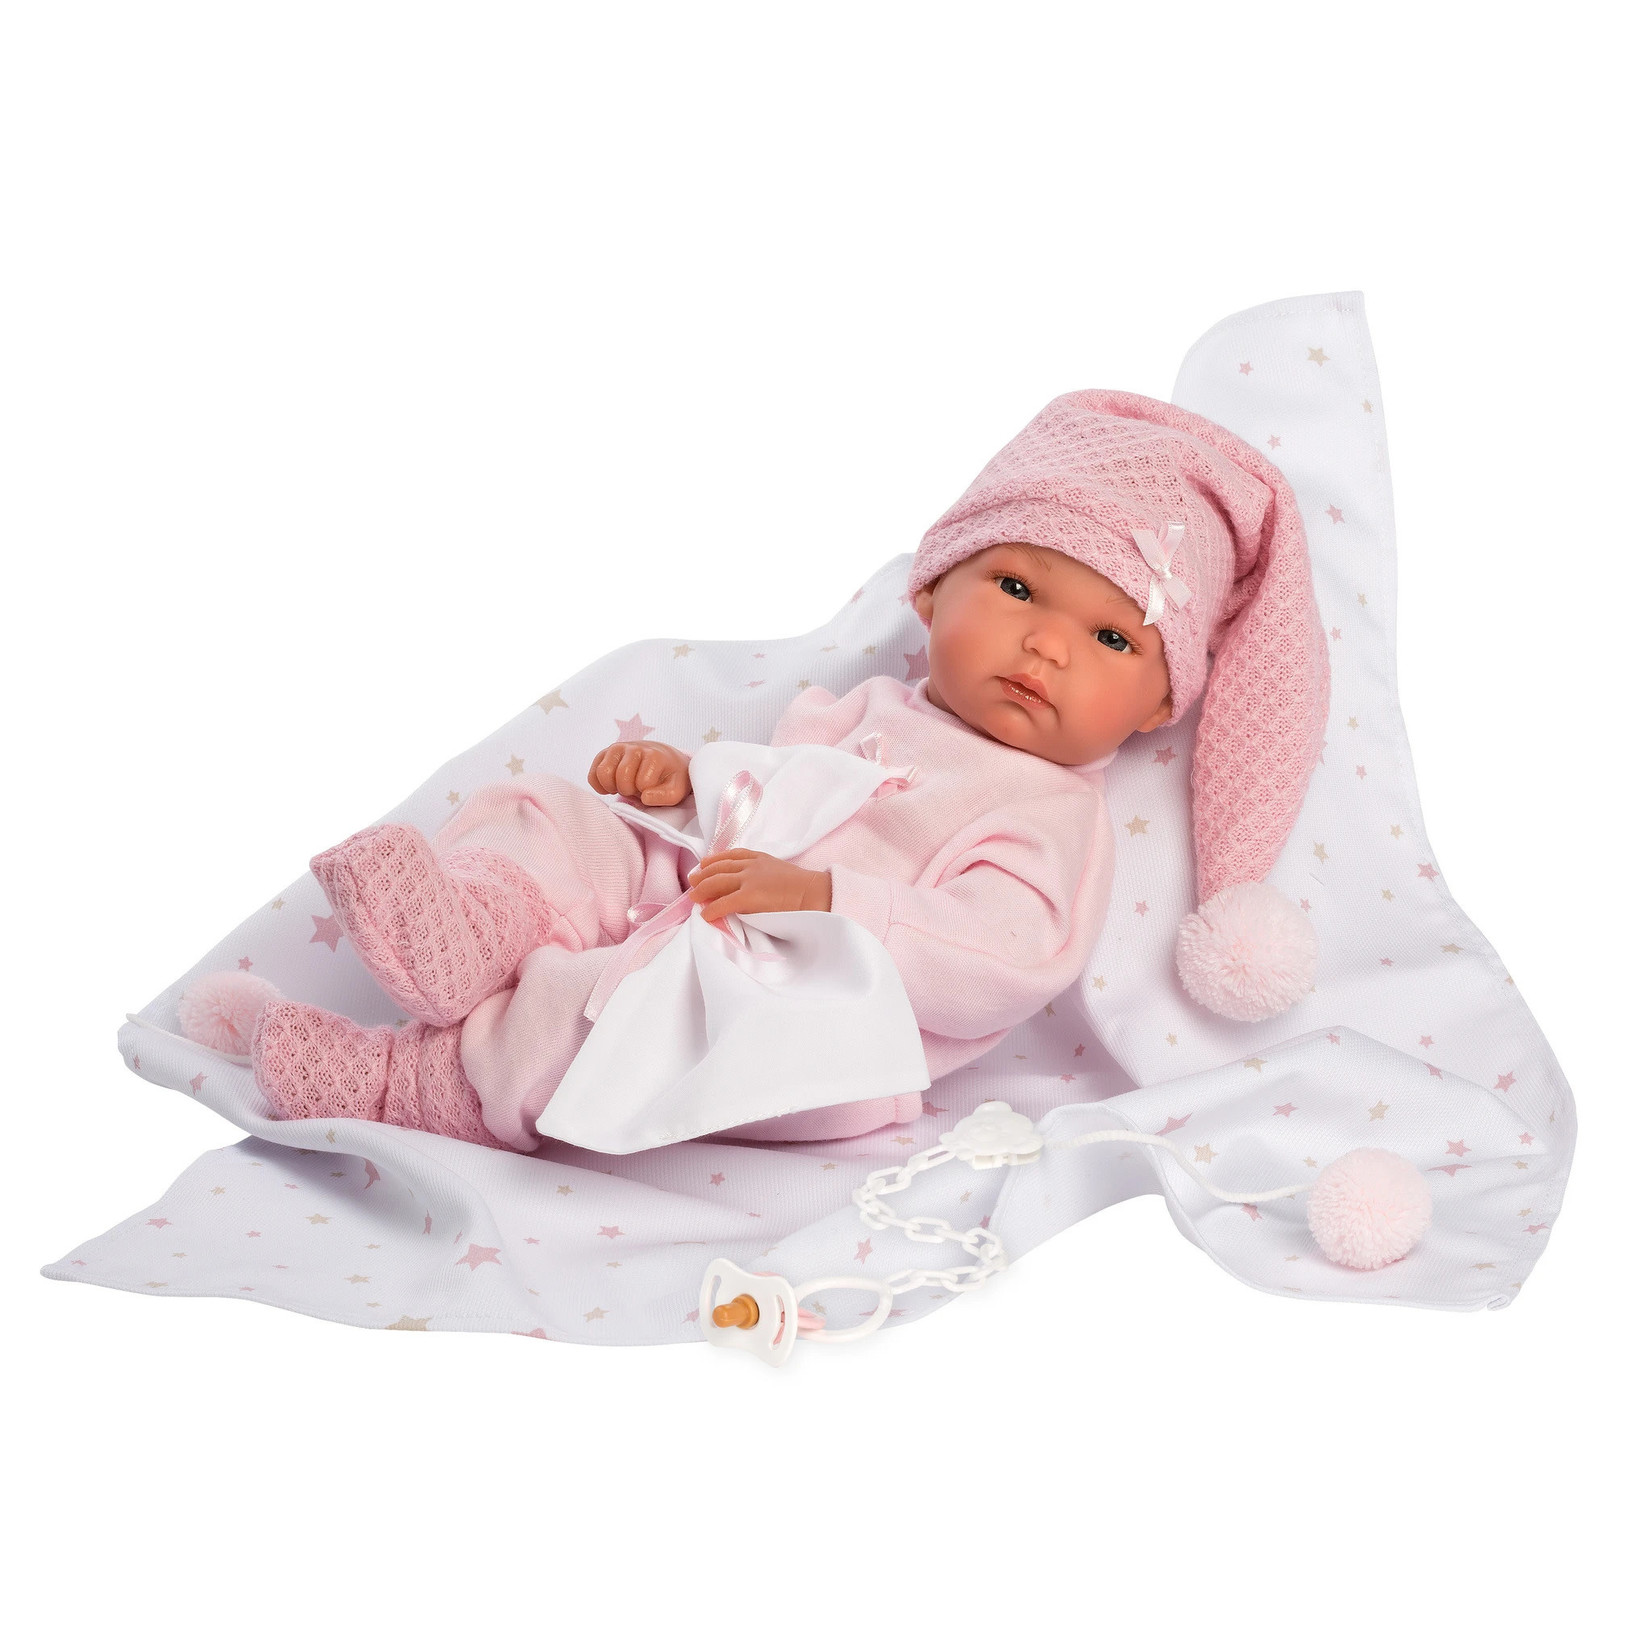 Llorens Dolls - Kaylee Baby Doll (13.8") with Blanket and Cap